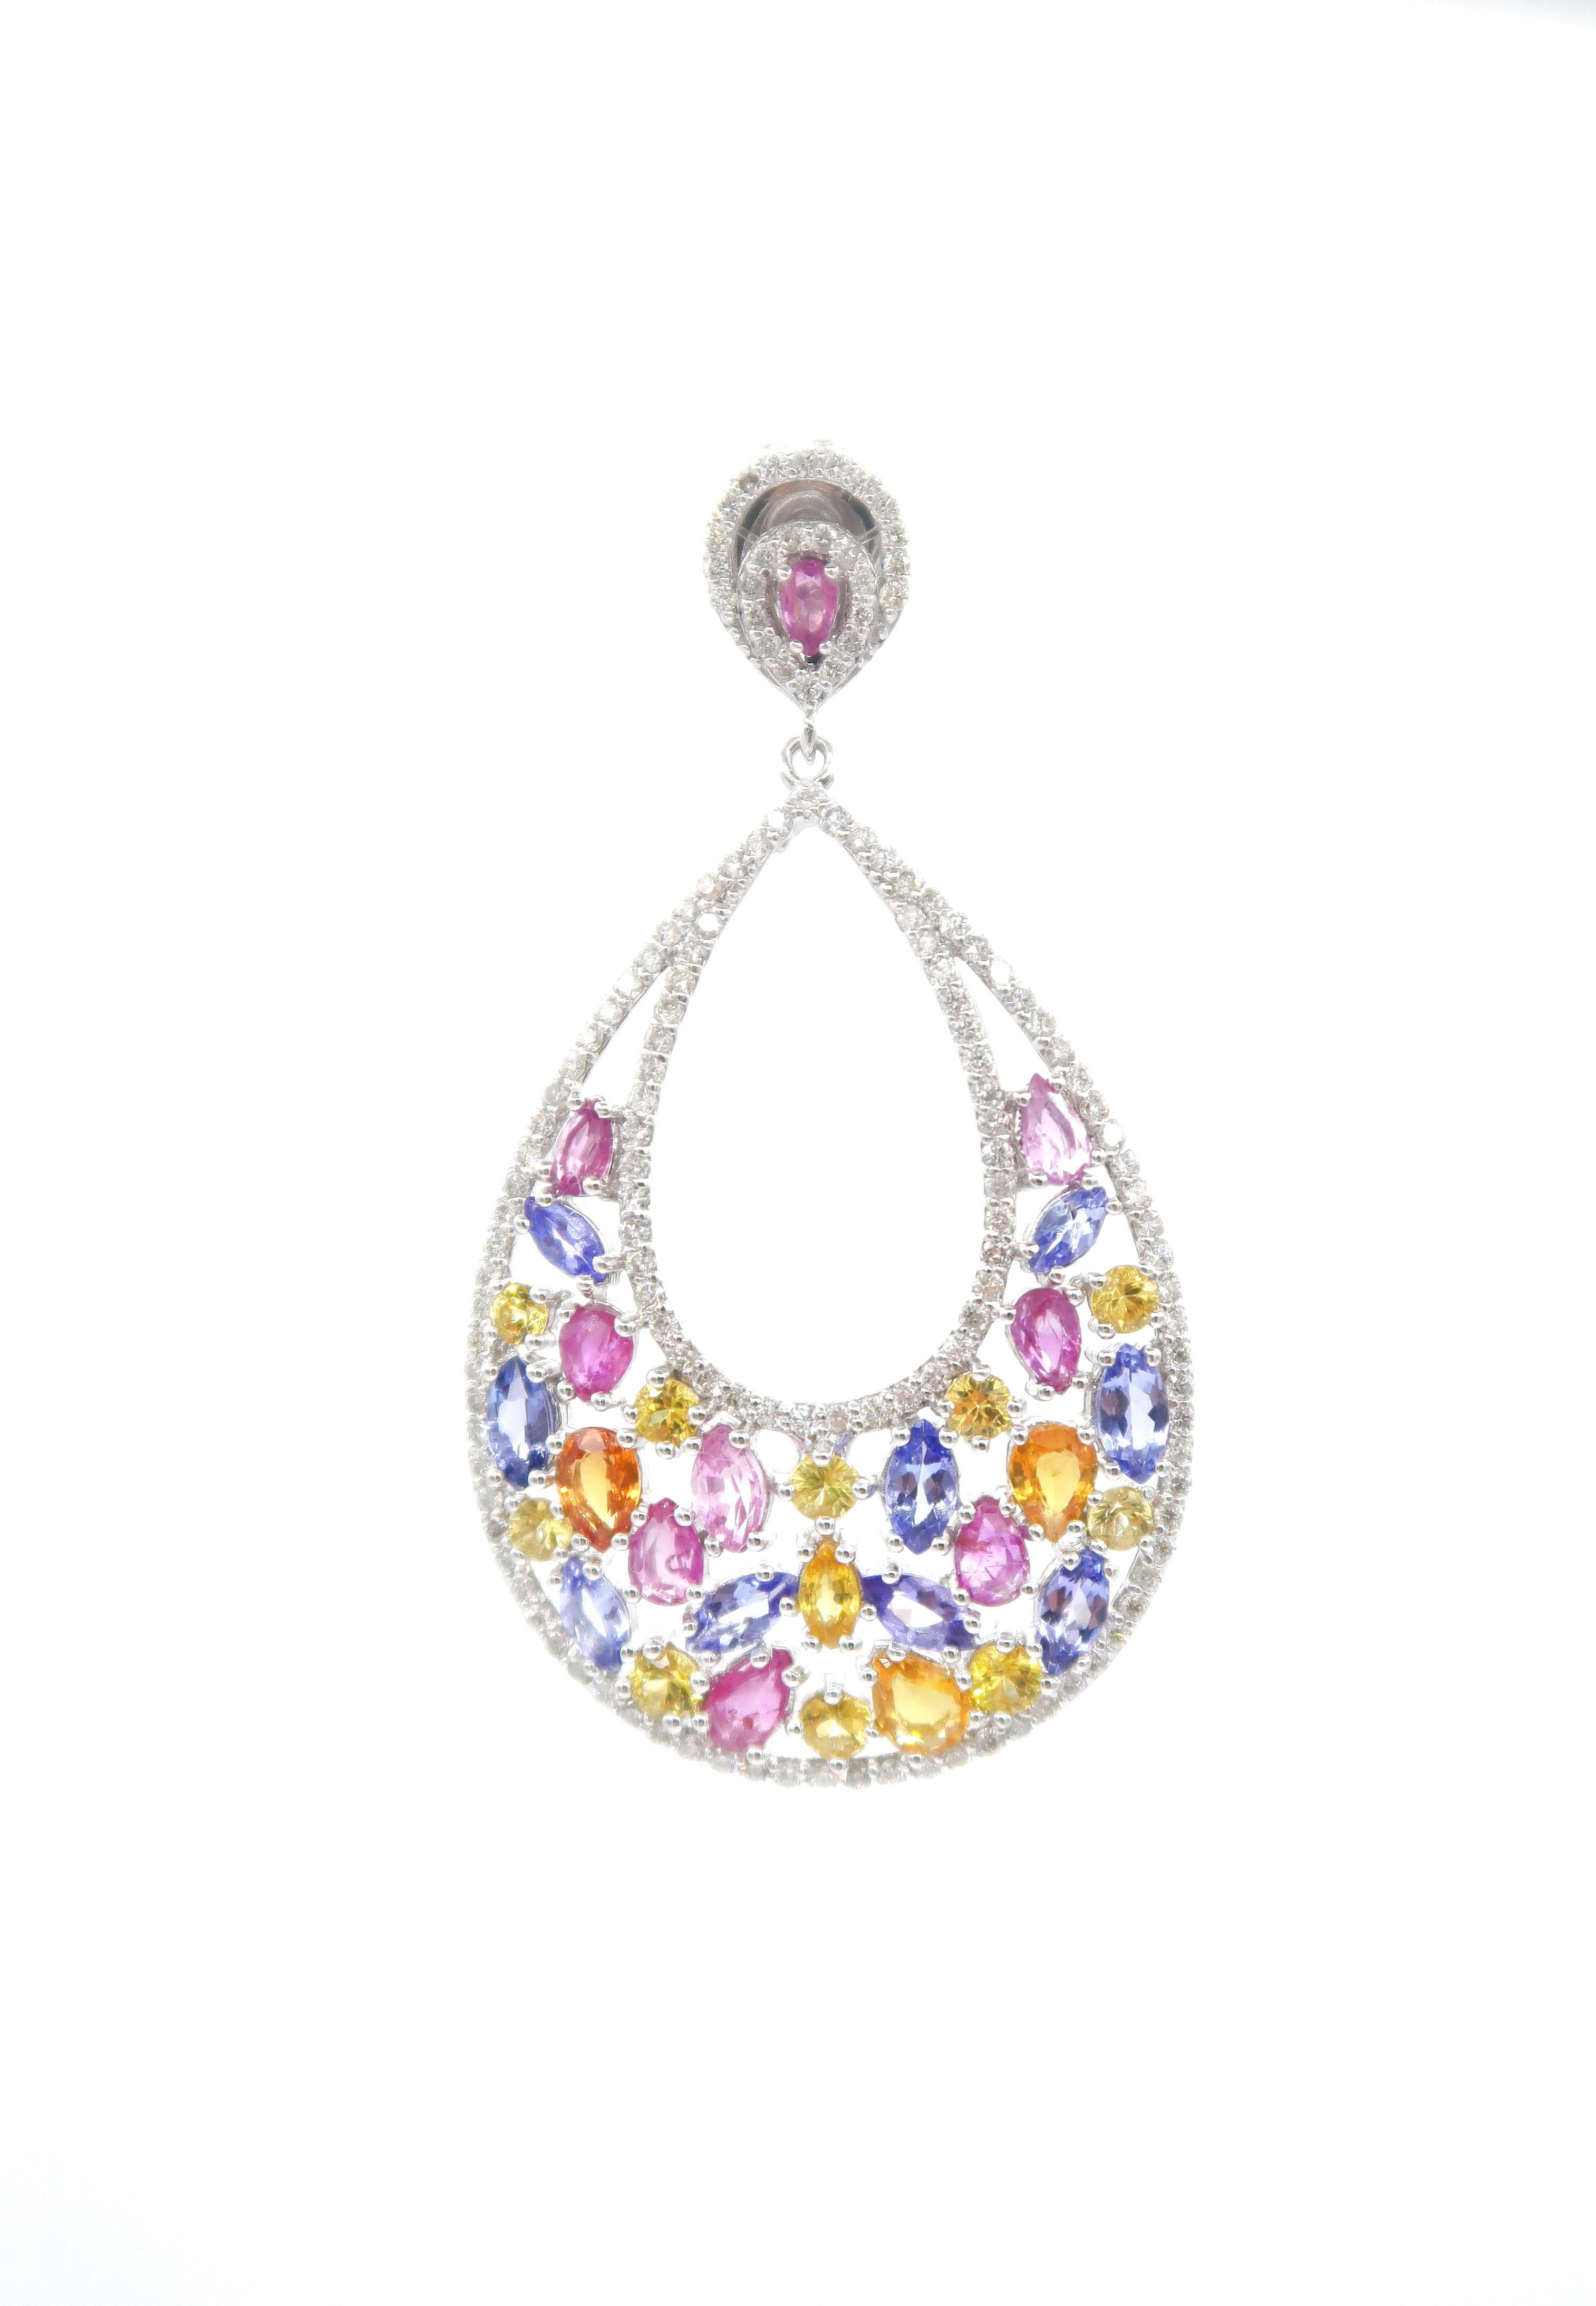 BOON Chandelier Earrings with Pink Sapphire, Yellow Sapphire, Blue Sapphire and Diamond

Metal: 18K White Gold, 19.44 g
Sapphire: pink, blue and yellow, 7.00 ct
Diamond: round brilliant, 1.62 ct
